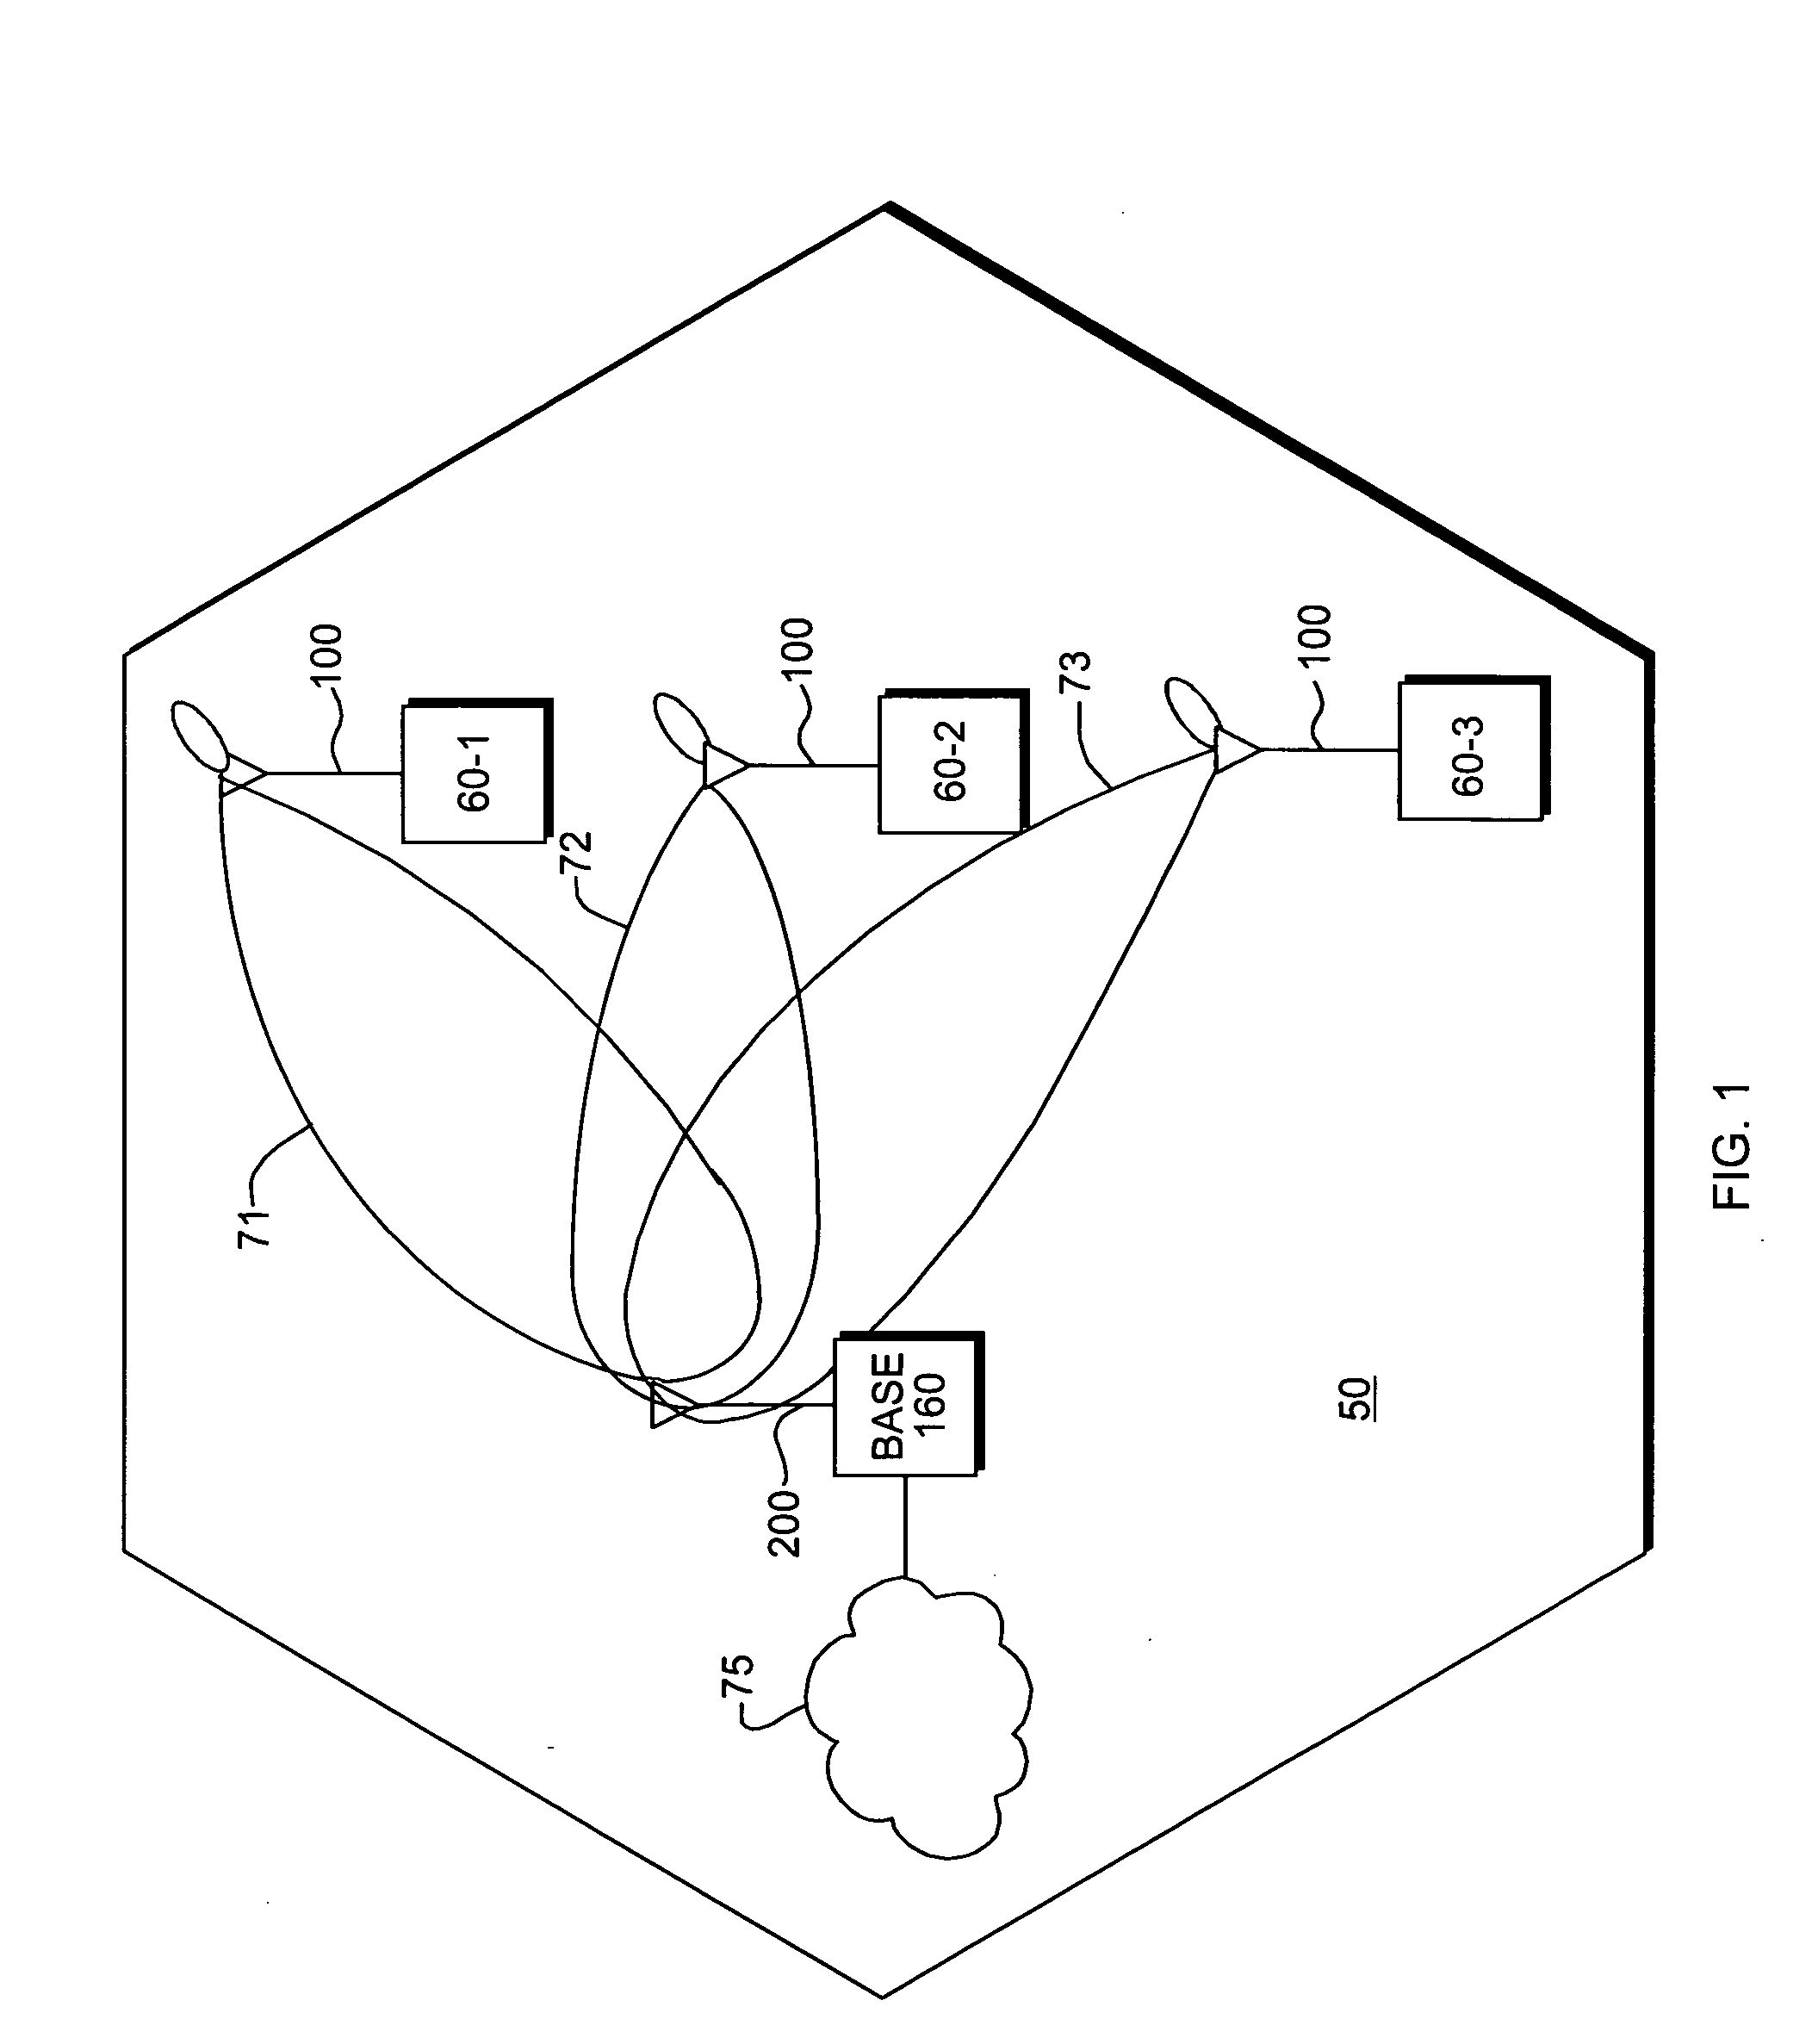 Method and apparatus for adapting antenna array using received perdetermined signal